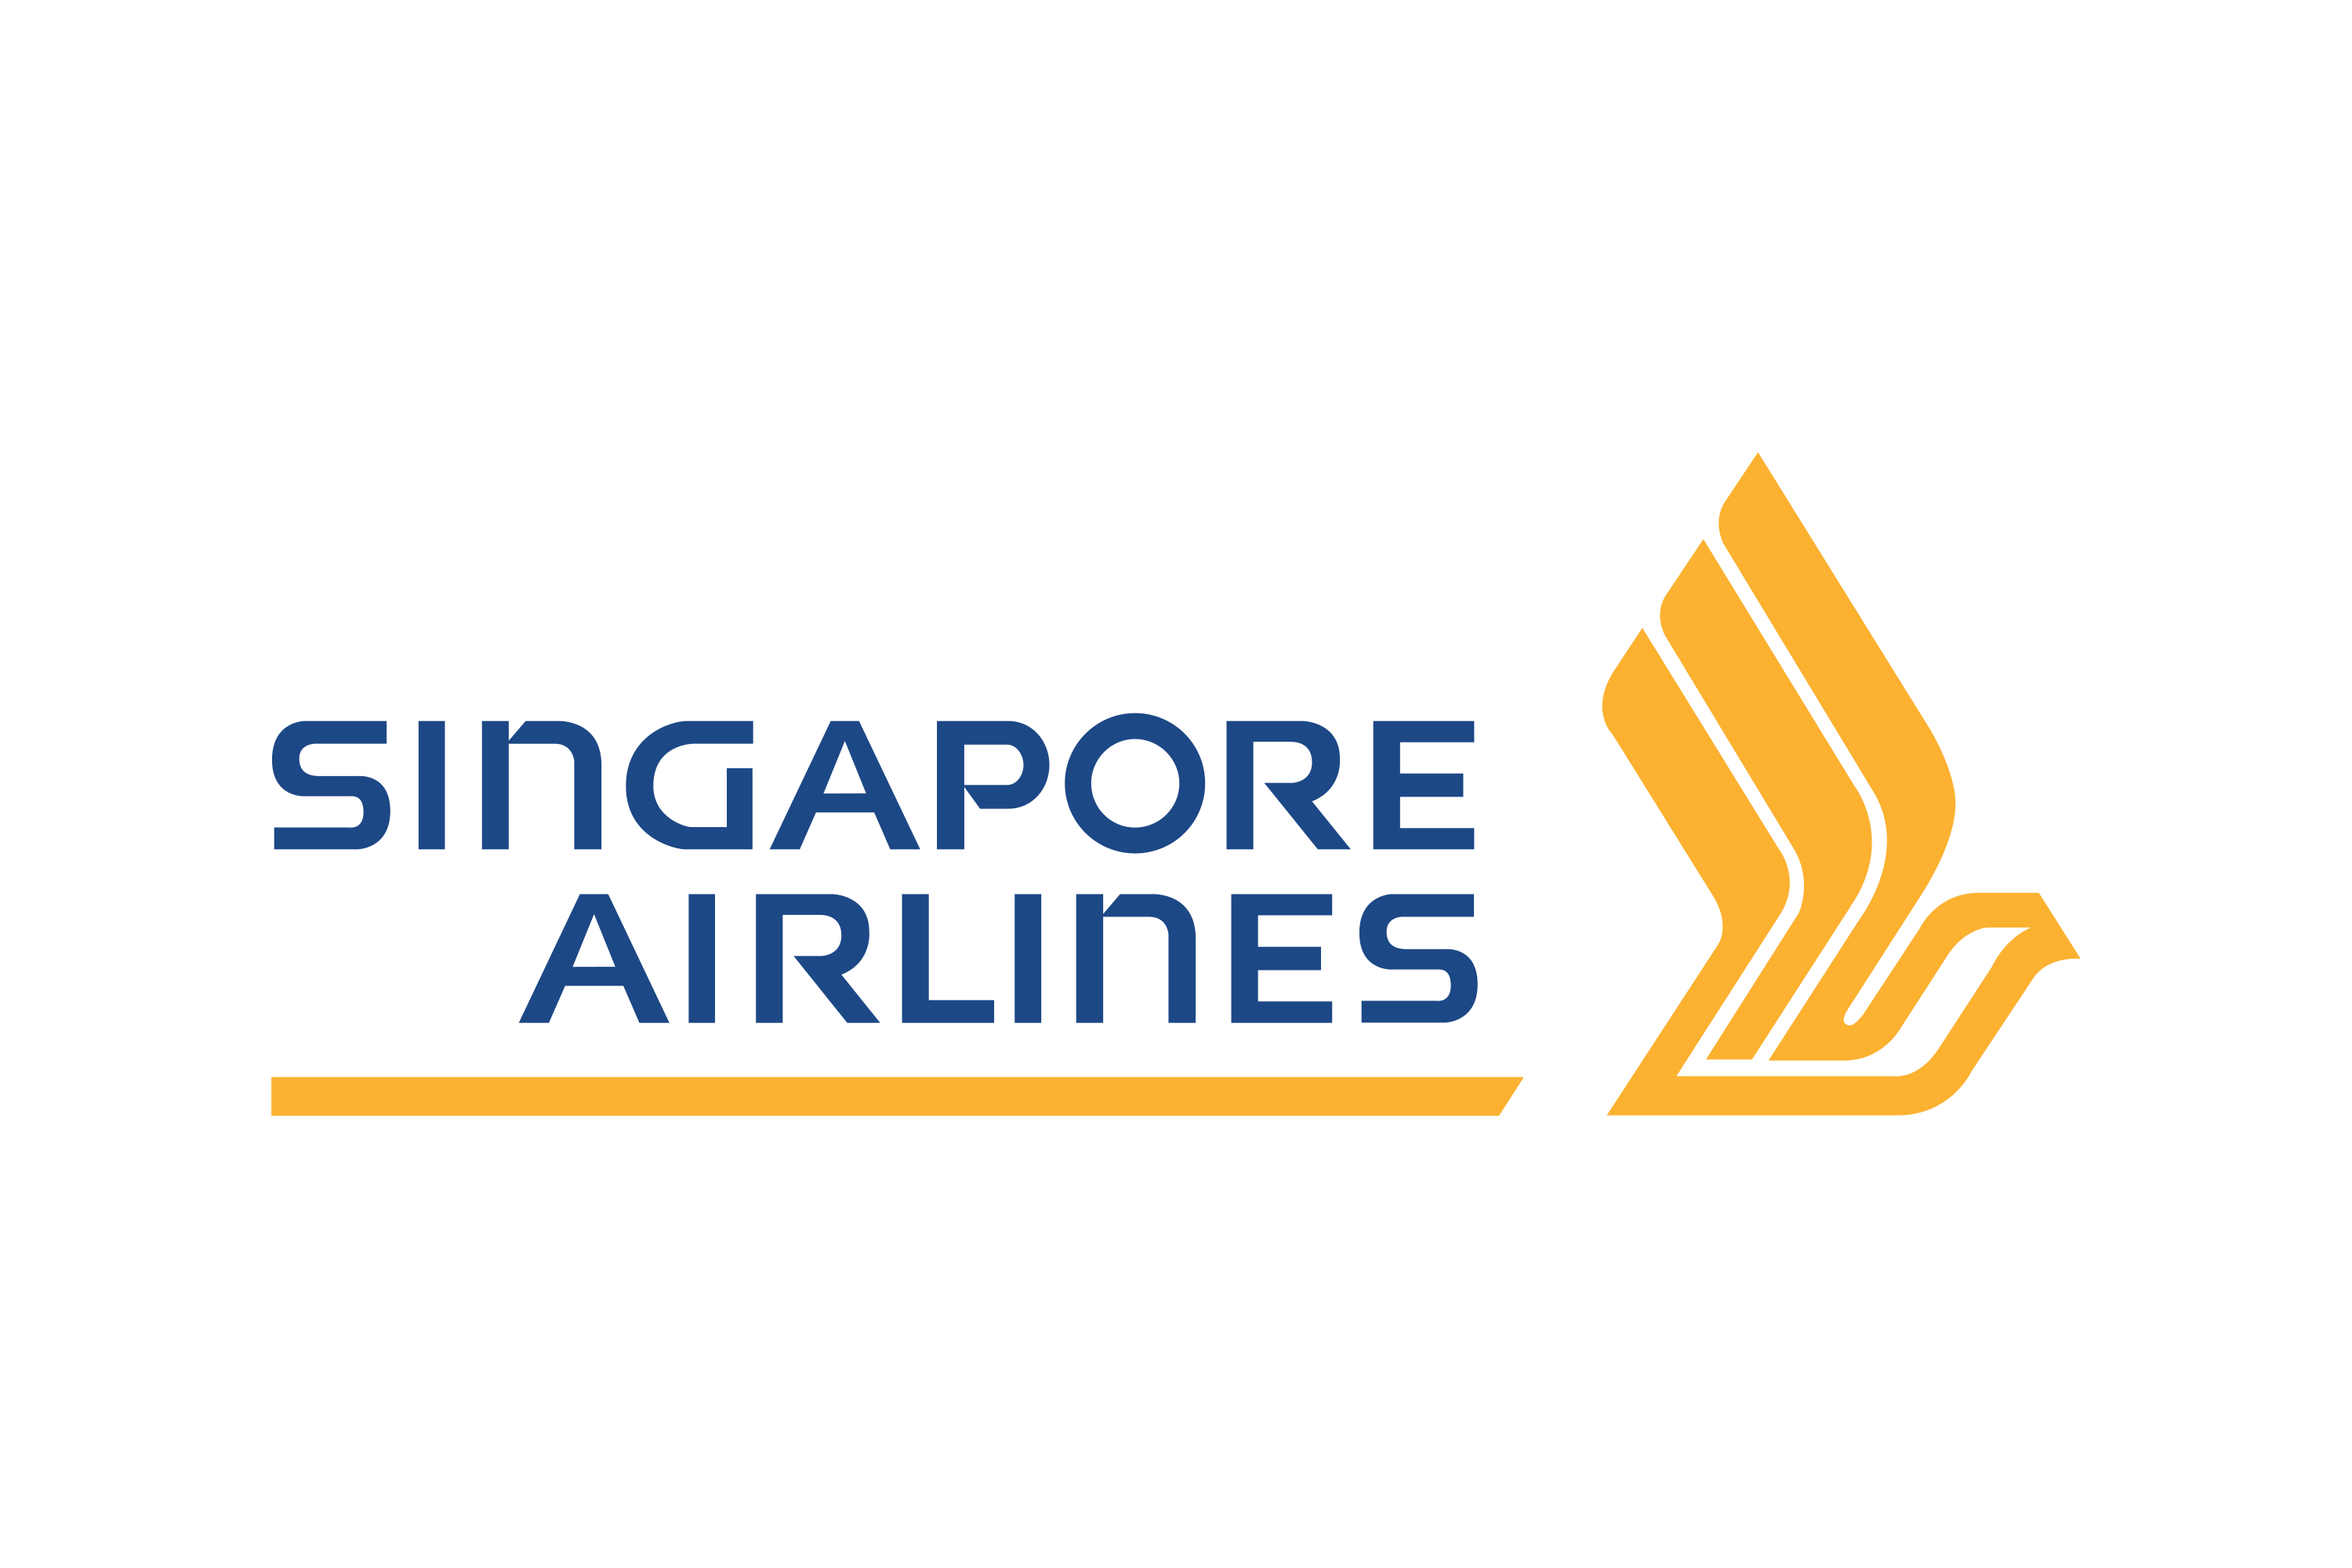 Download Singapore Airlines Logo in SVG Vector or PNG File Format - Logo.wine